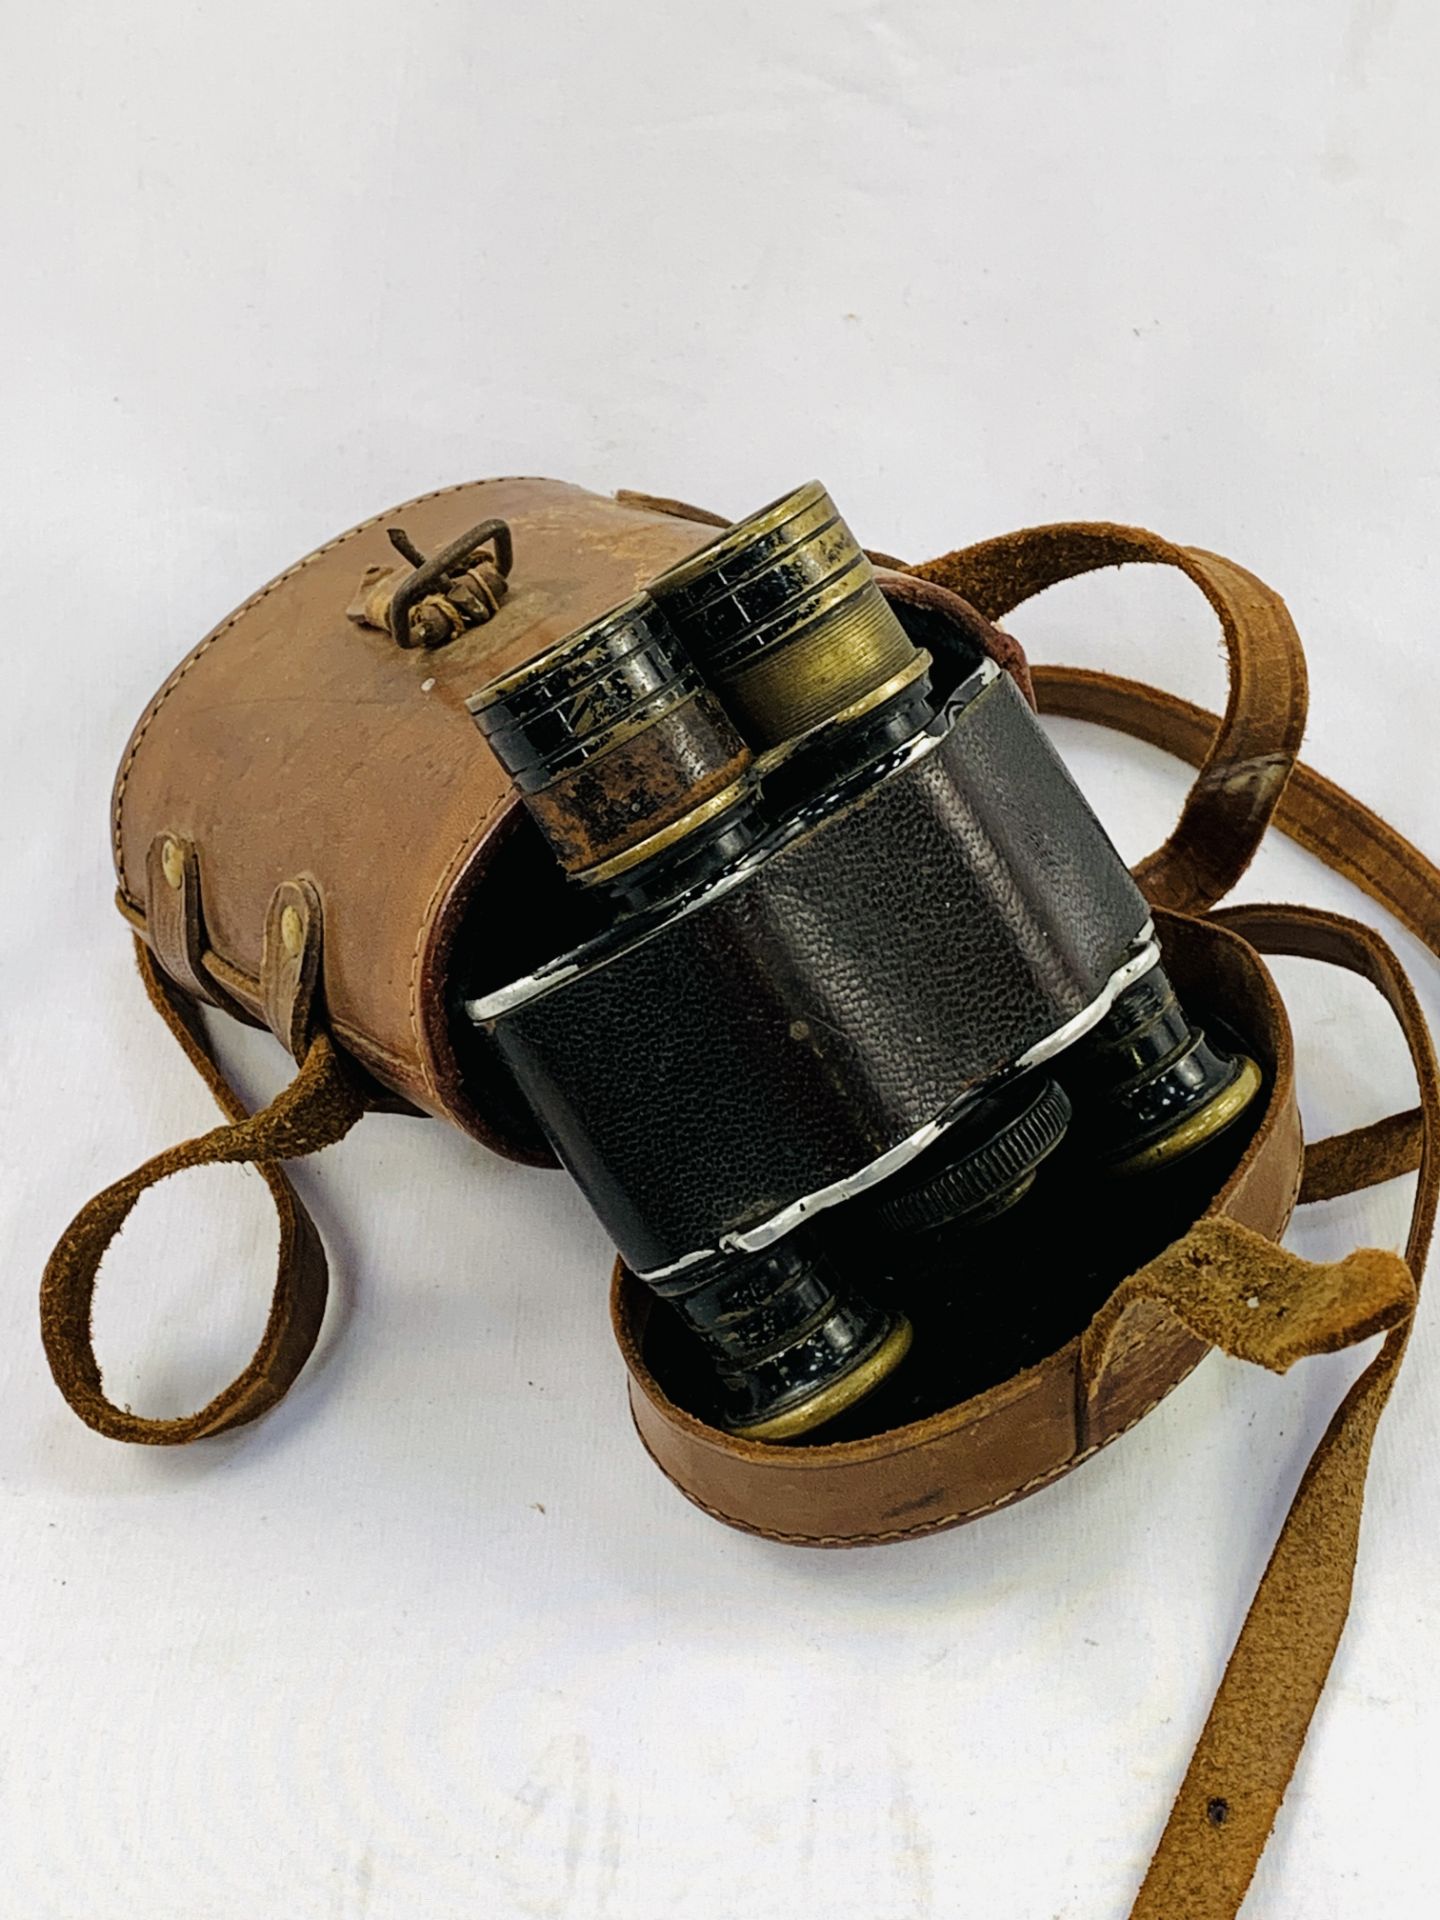 Early 20th Century leather covered binoculars by Aitchison in original brown leather case